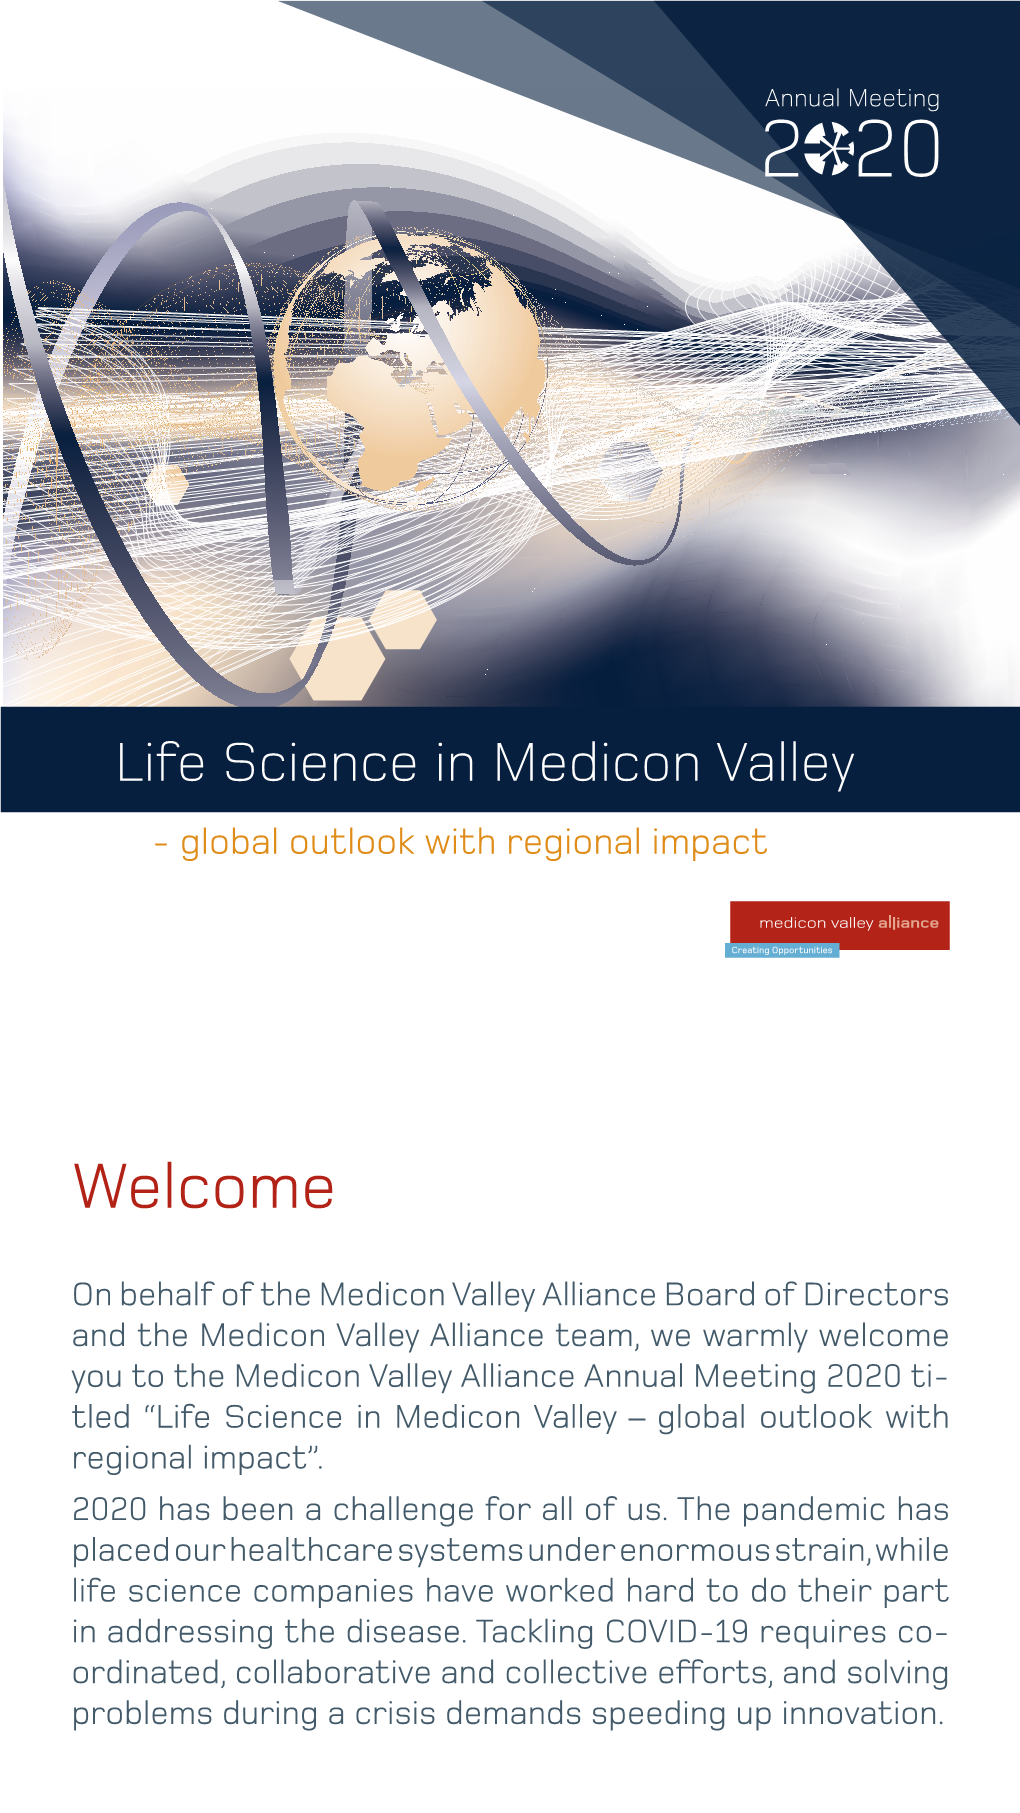 Life Science in Medicon Valley - Global Outlook with Regional Impact